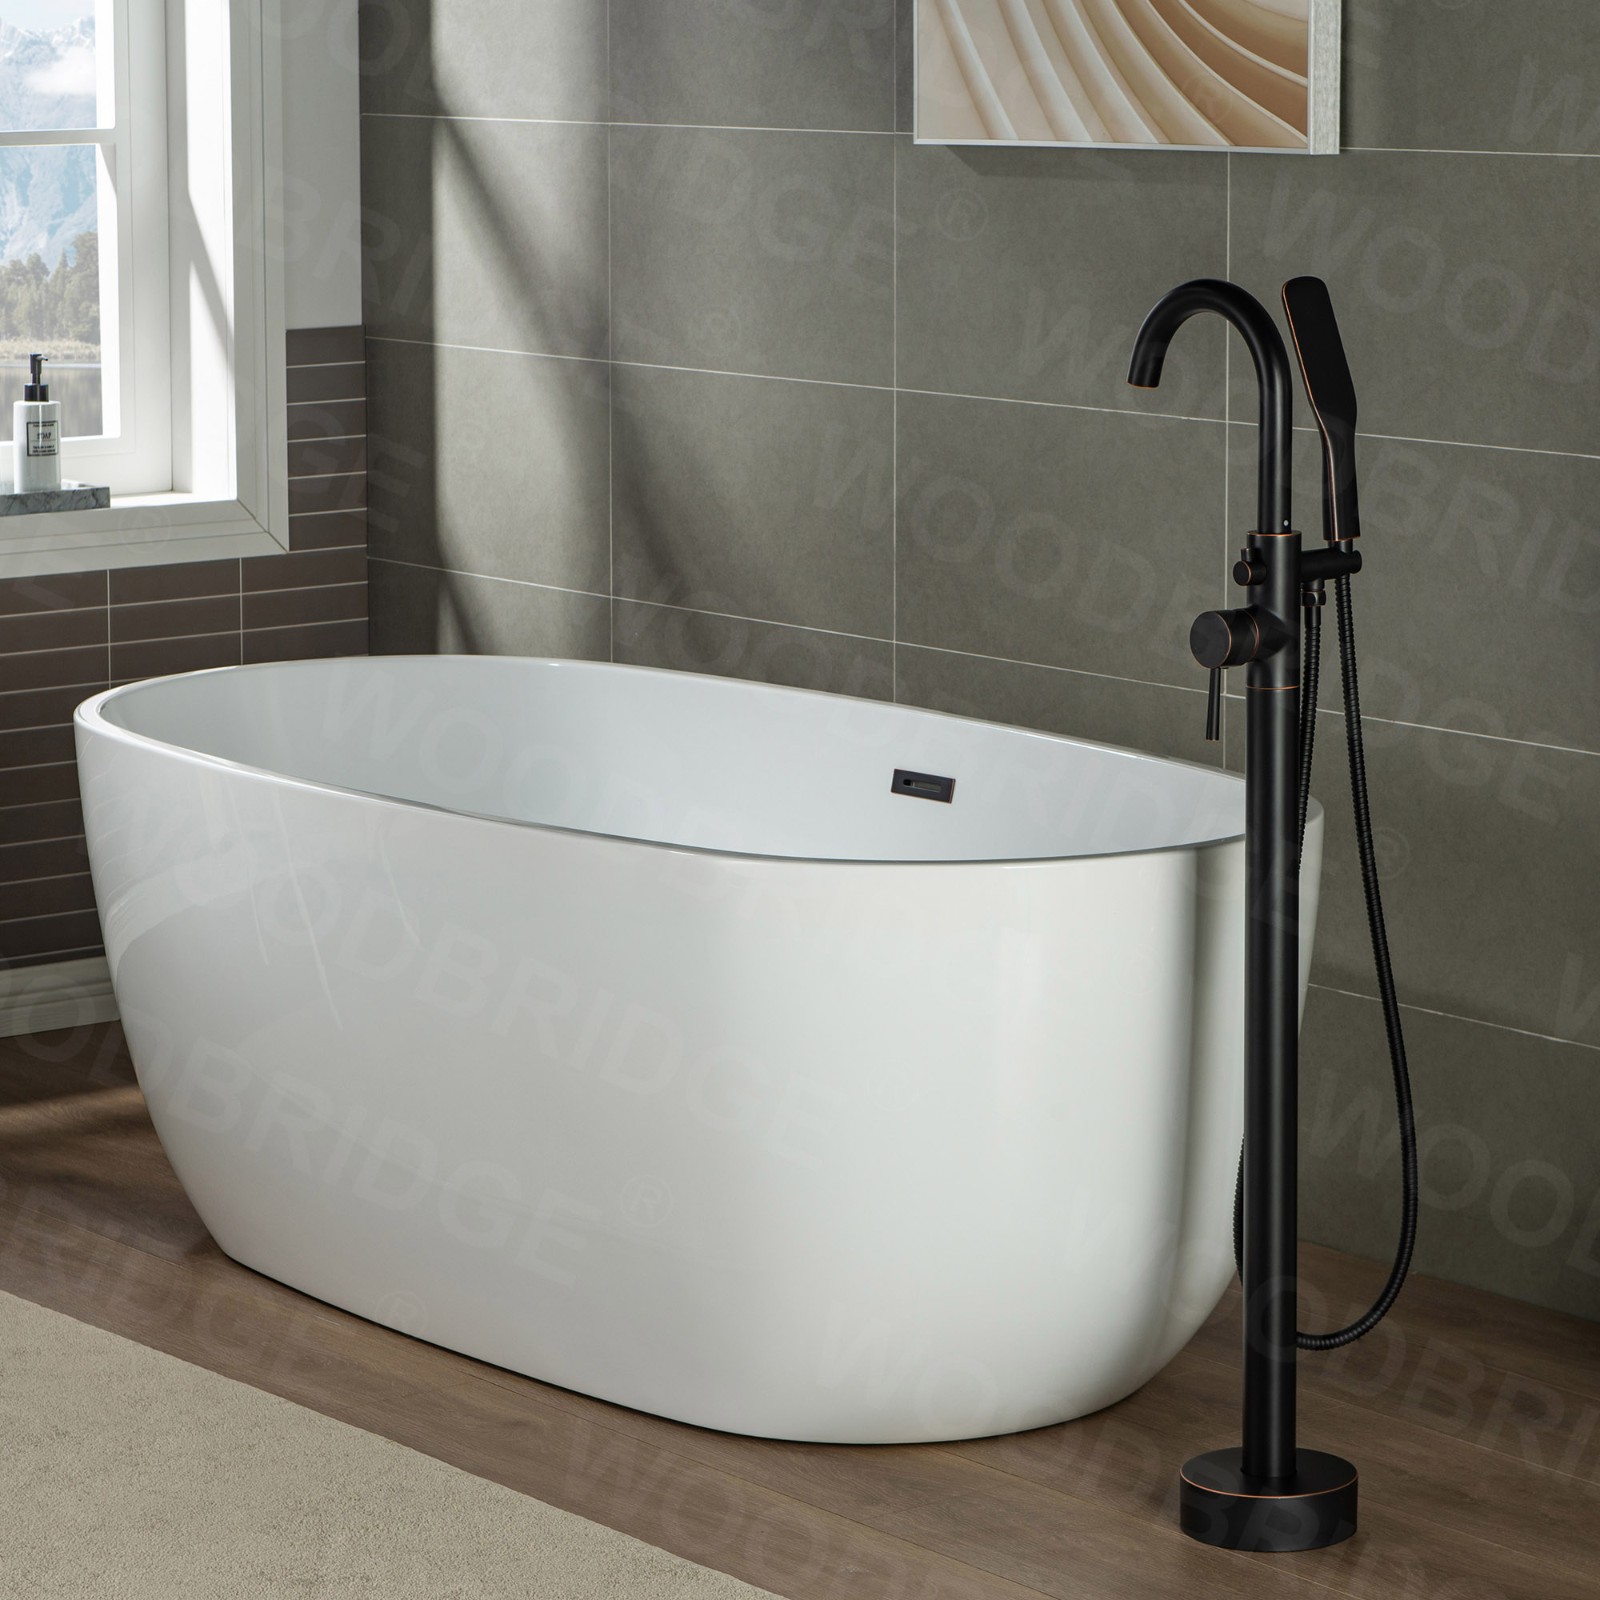  WOODBRIDGE Contemporary Single Handle Floor Mount Freestanding Tub Filler Faucet with Hand Shower in (Oil Rubbed Bronze) Finish,F0010ORBSQ_6033